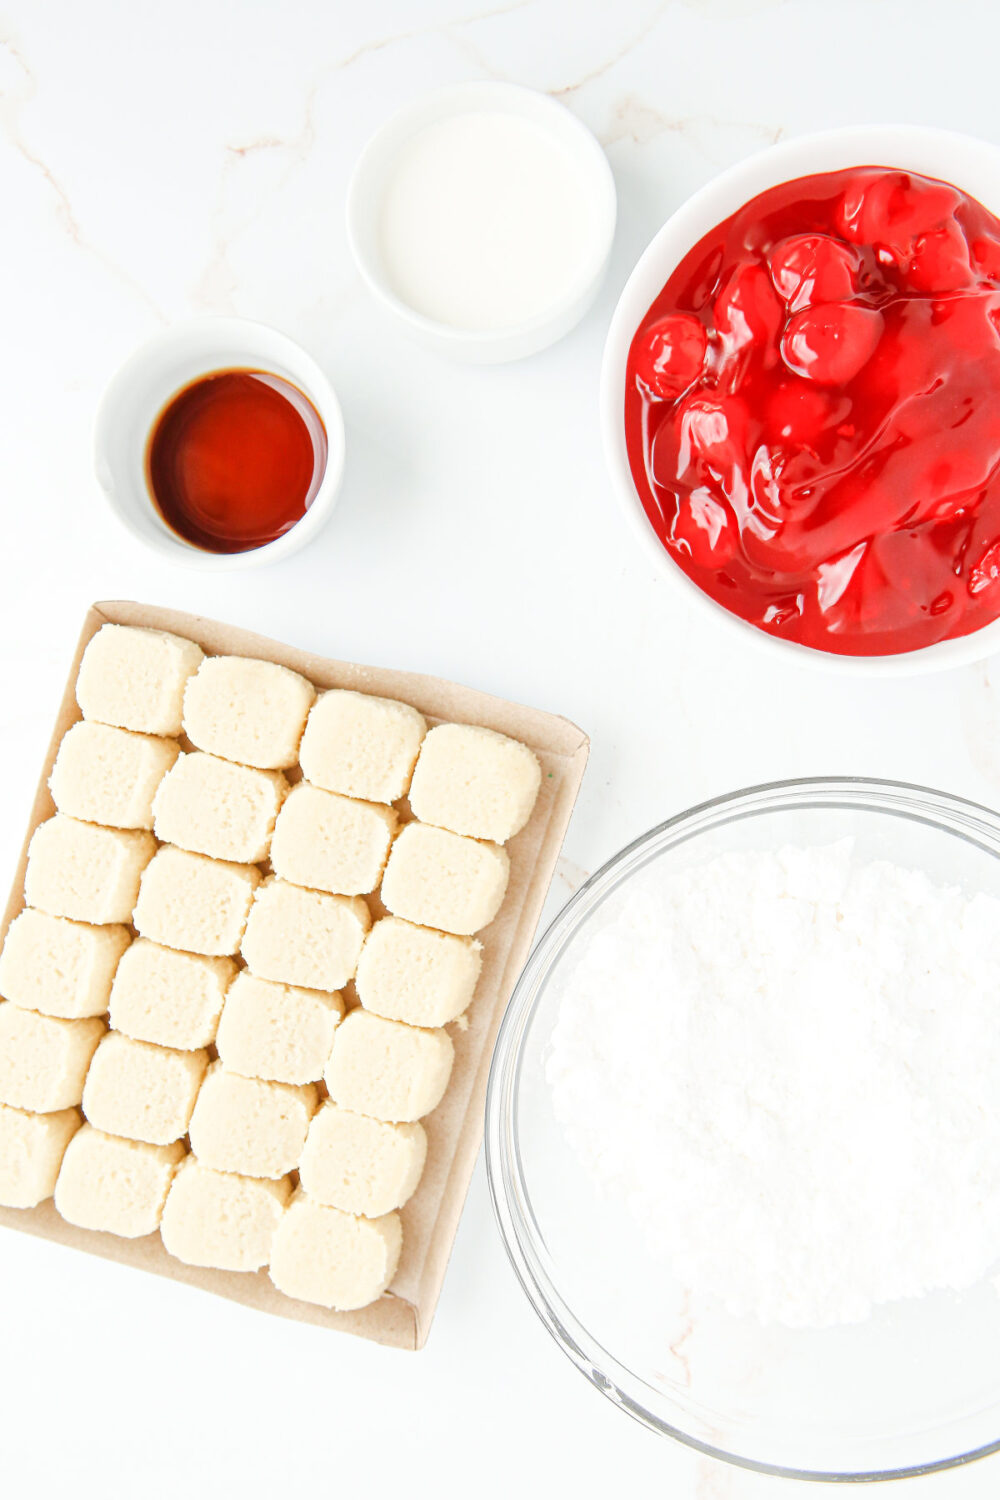 Cherries, sugar cookie dough, and other ingredients to make cherry pie cookies.